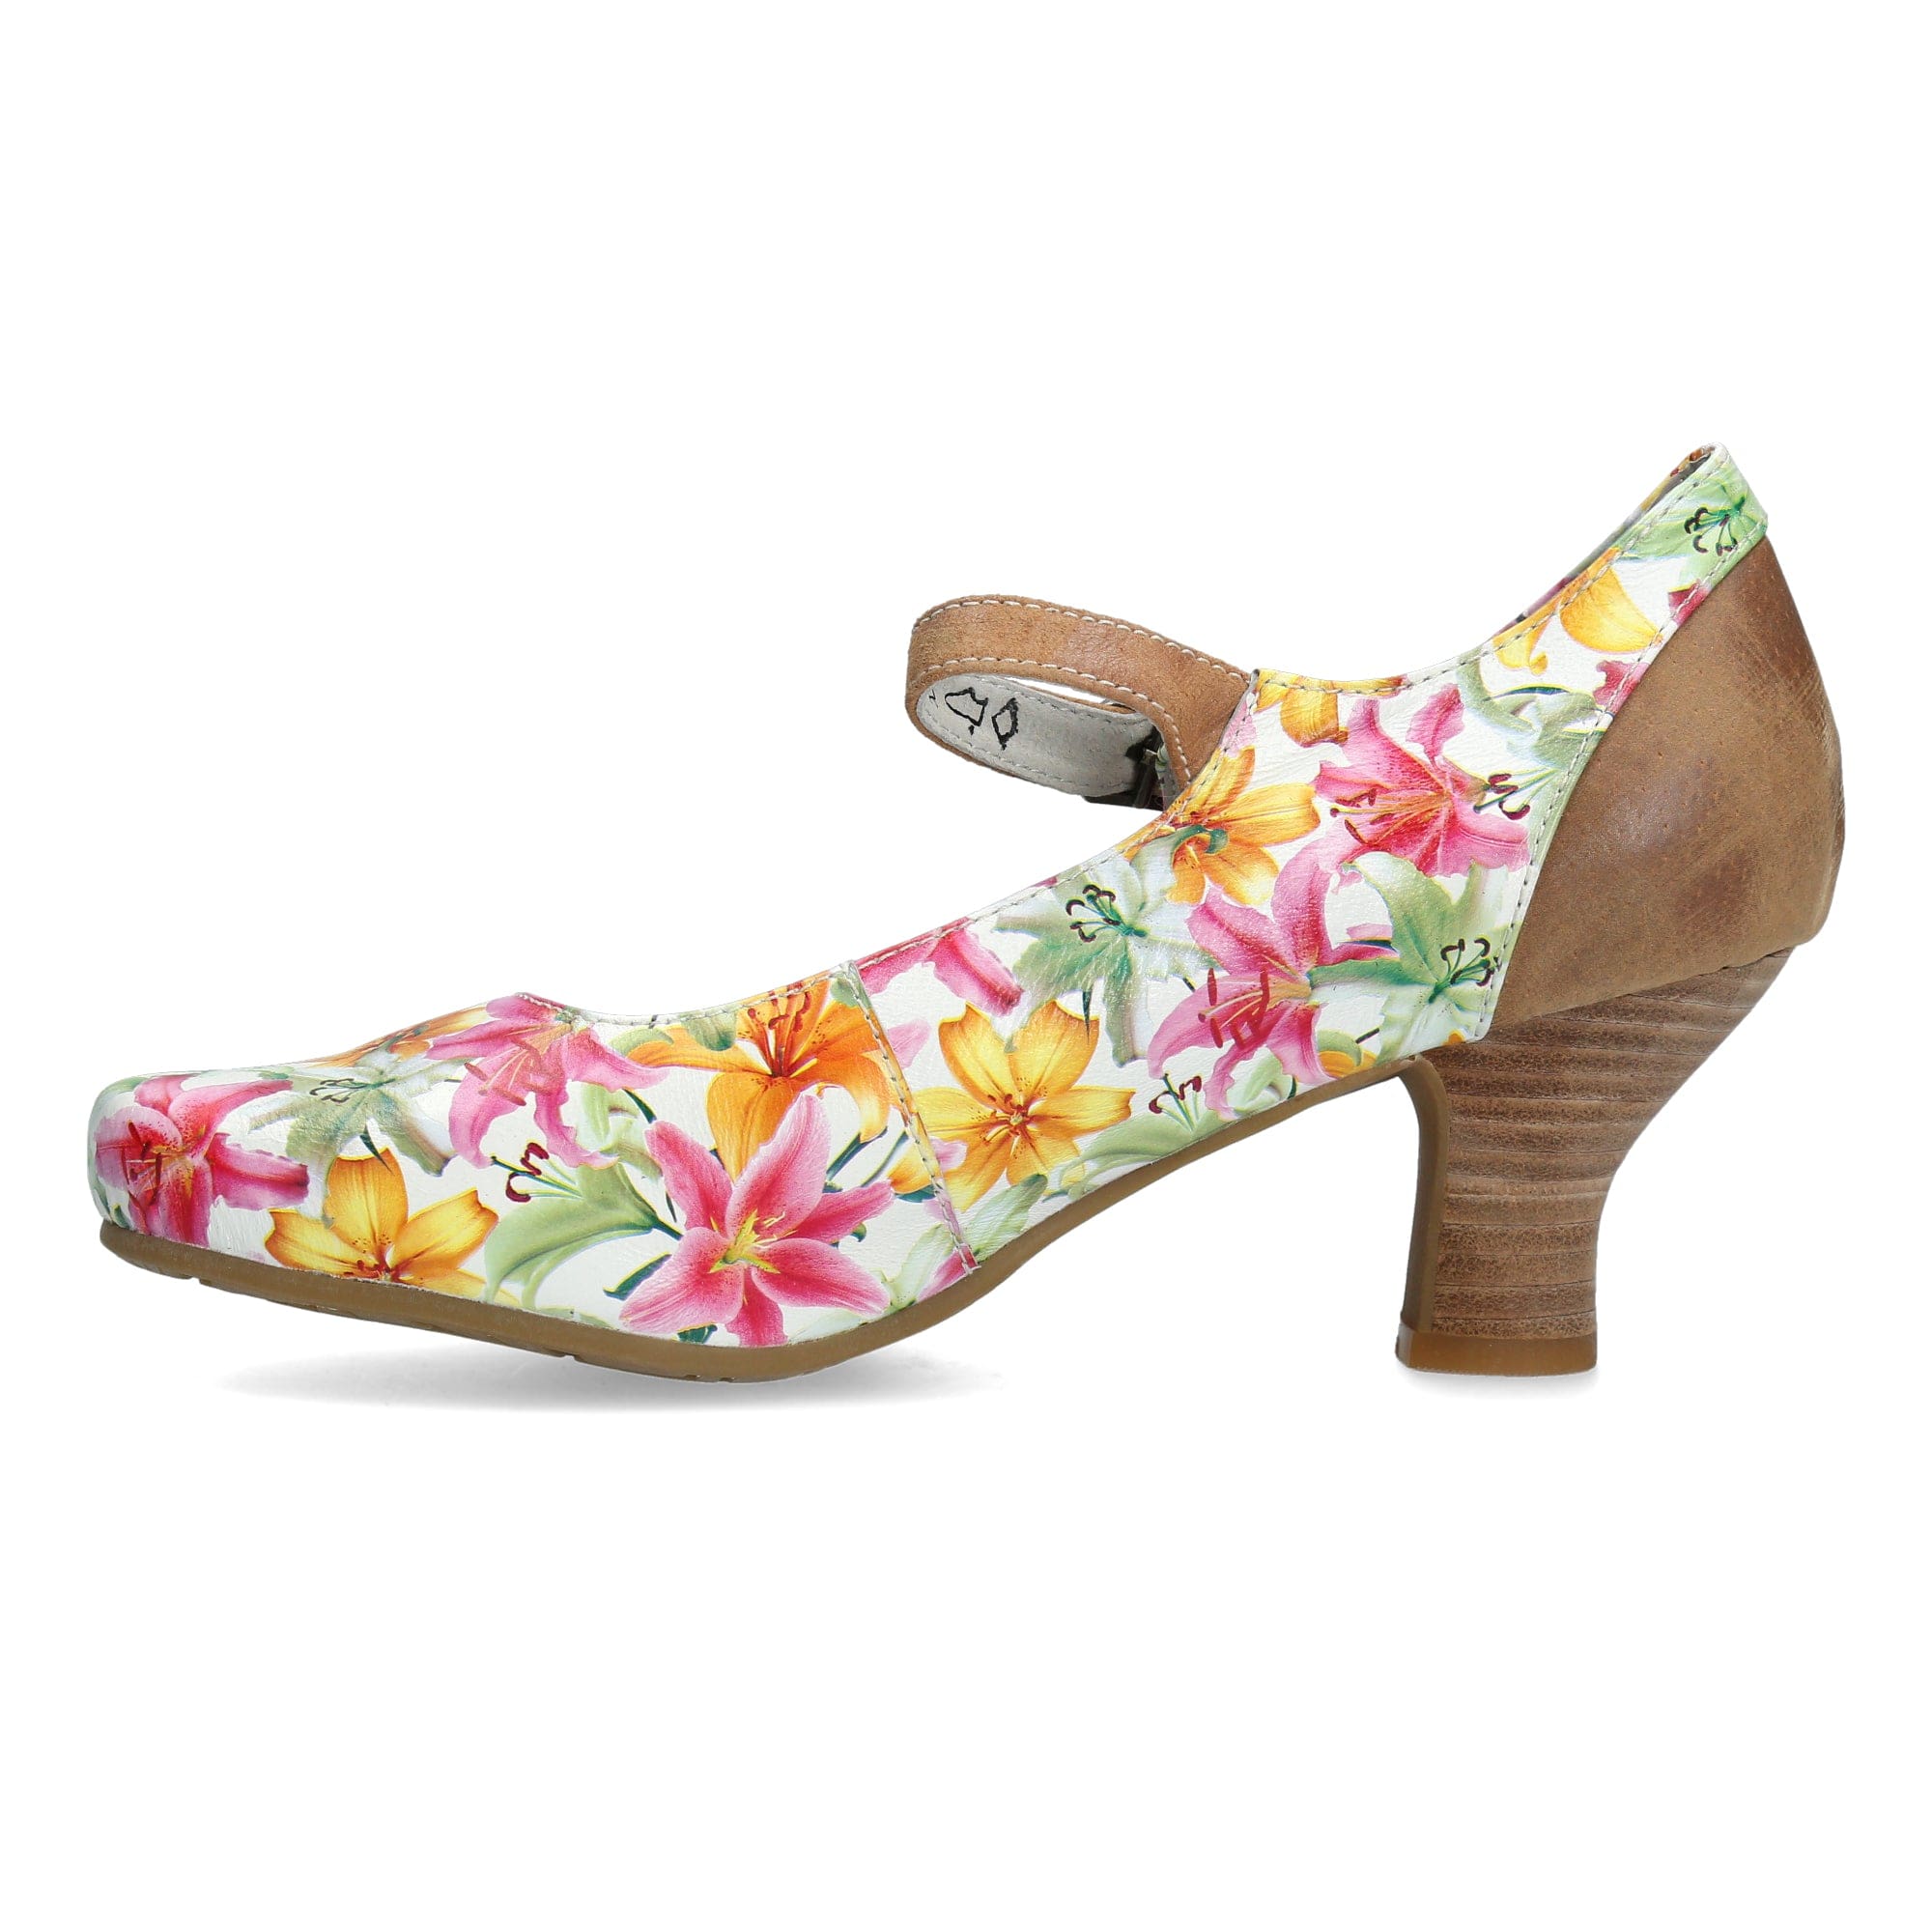 Buty CANDICE 12 - Anise / 40 - But sądowy